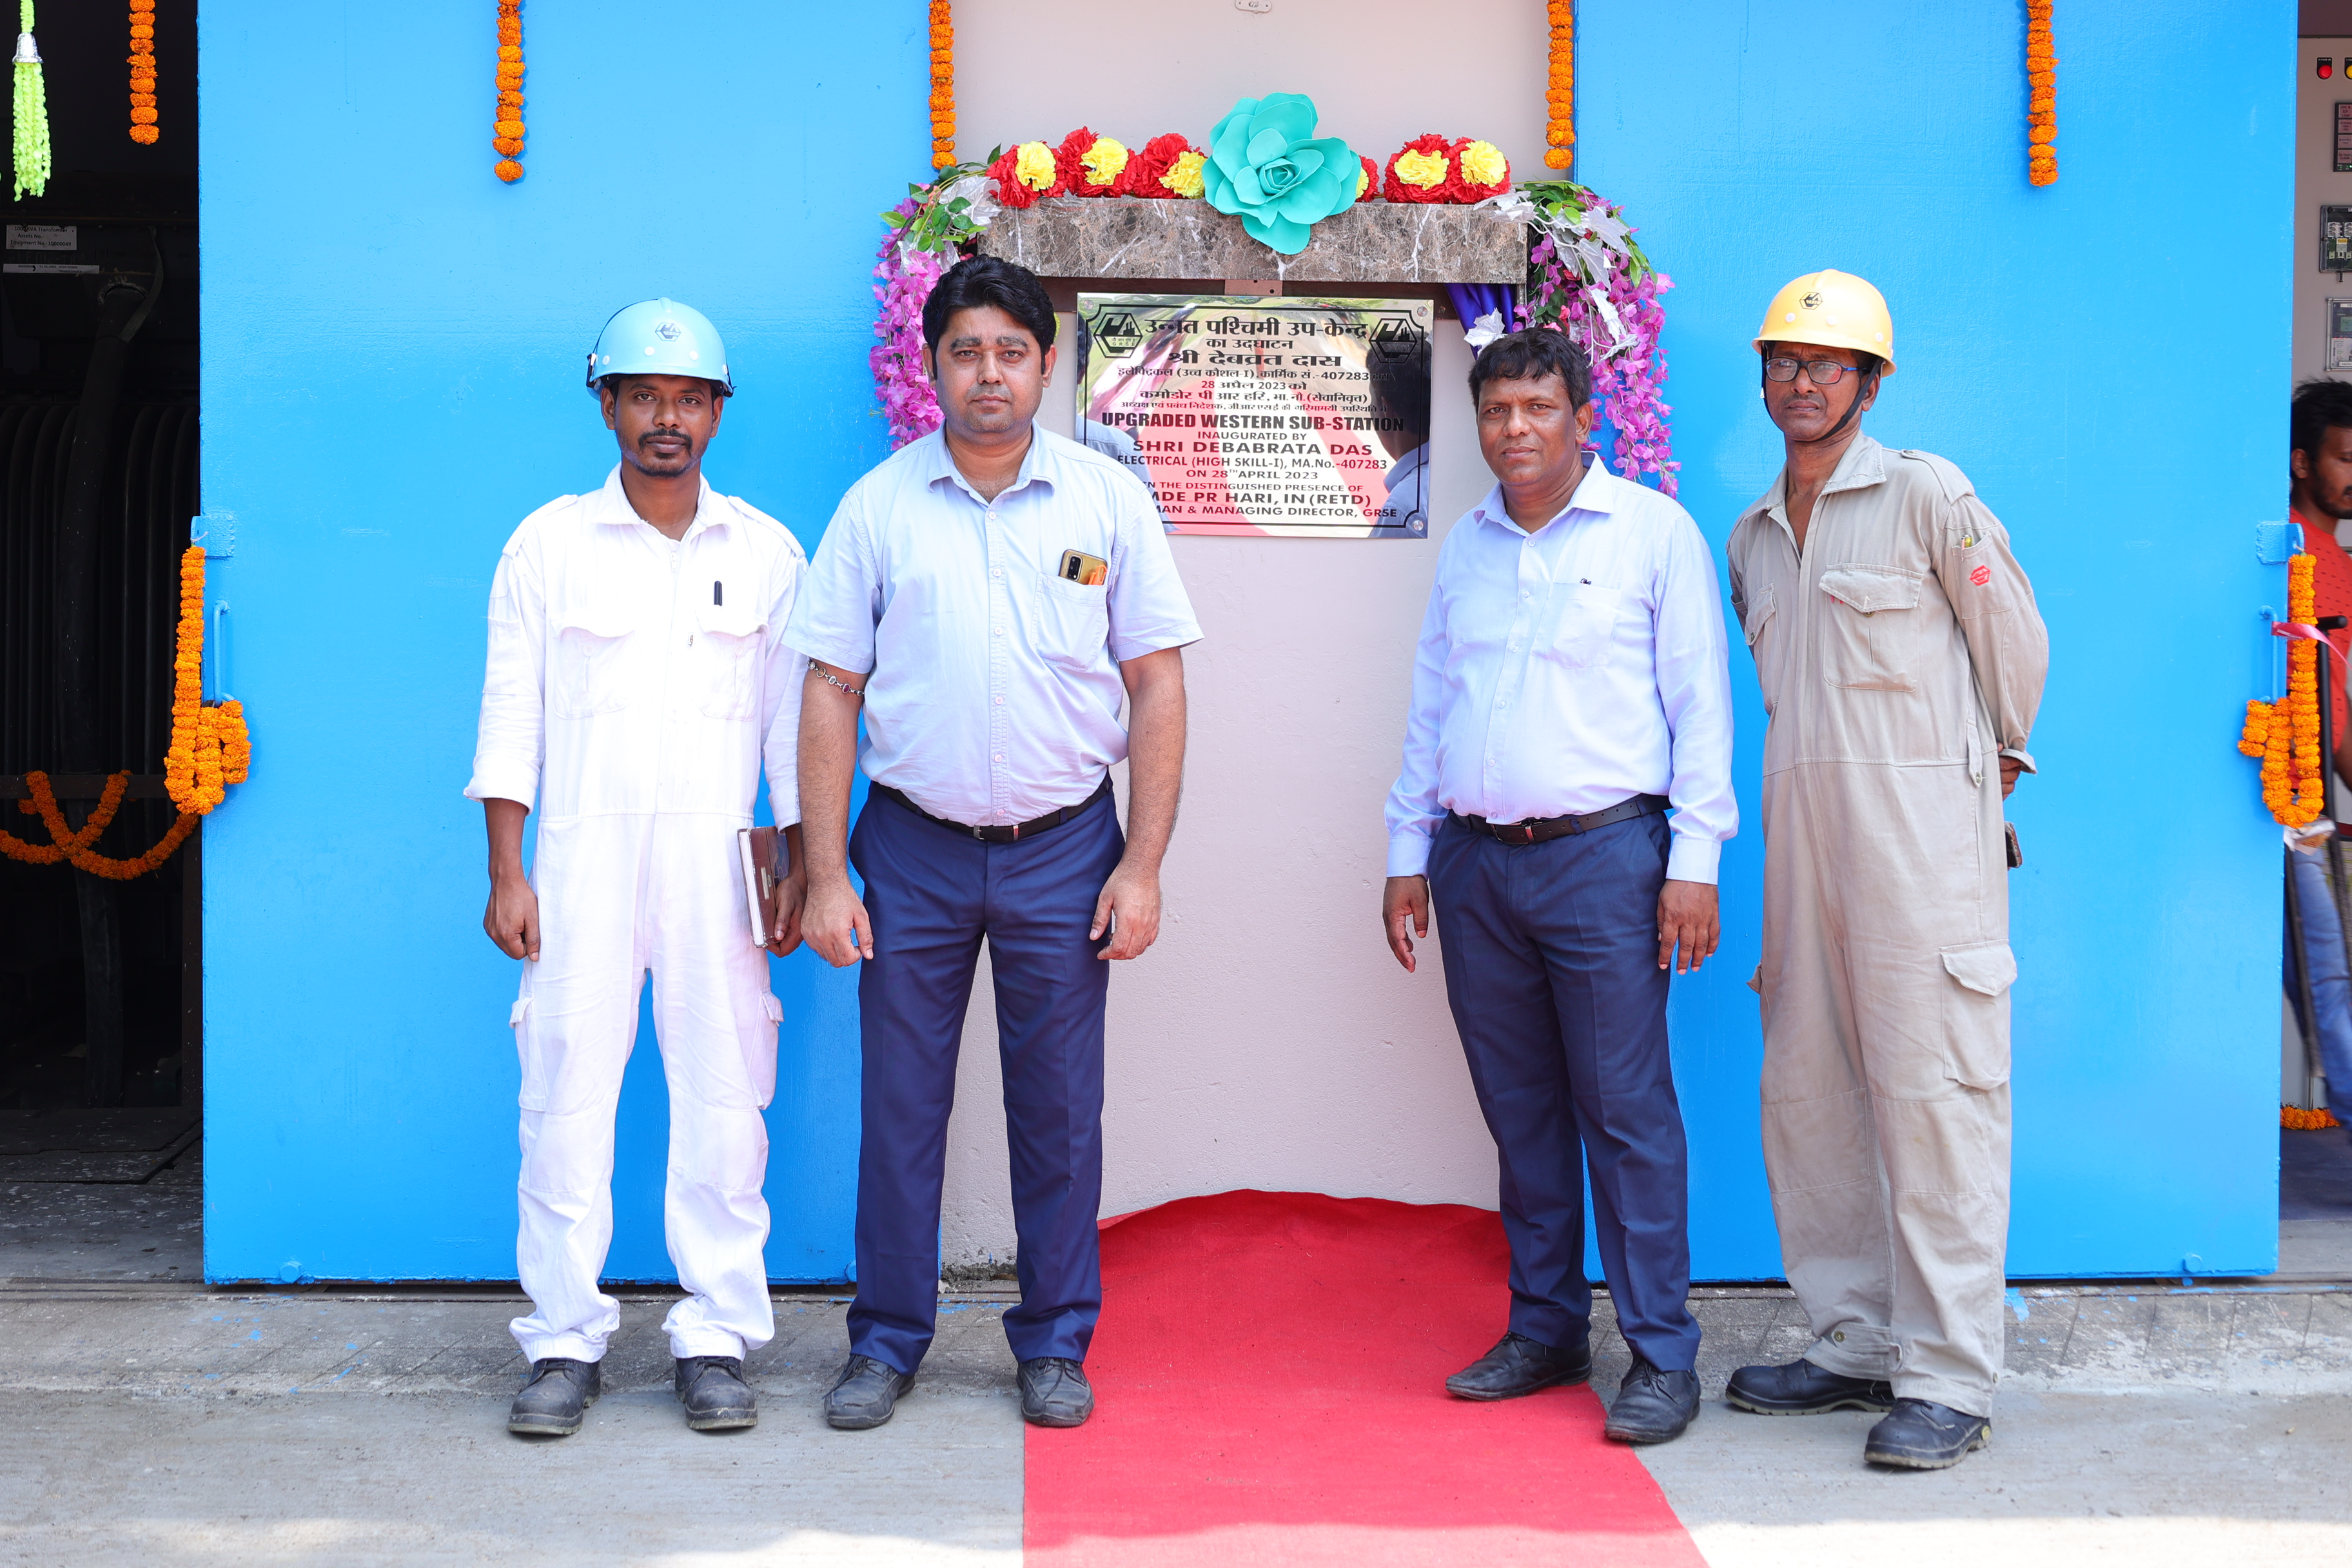 Inauguration of Upgraded Western Sub-Station at RBD Unit on 28 Apr 23